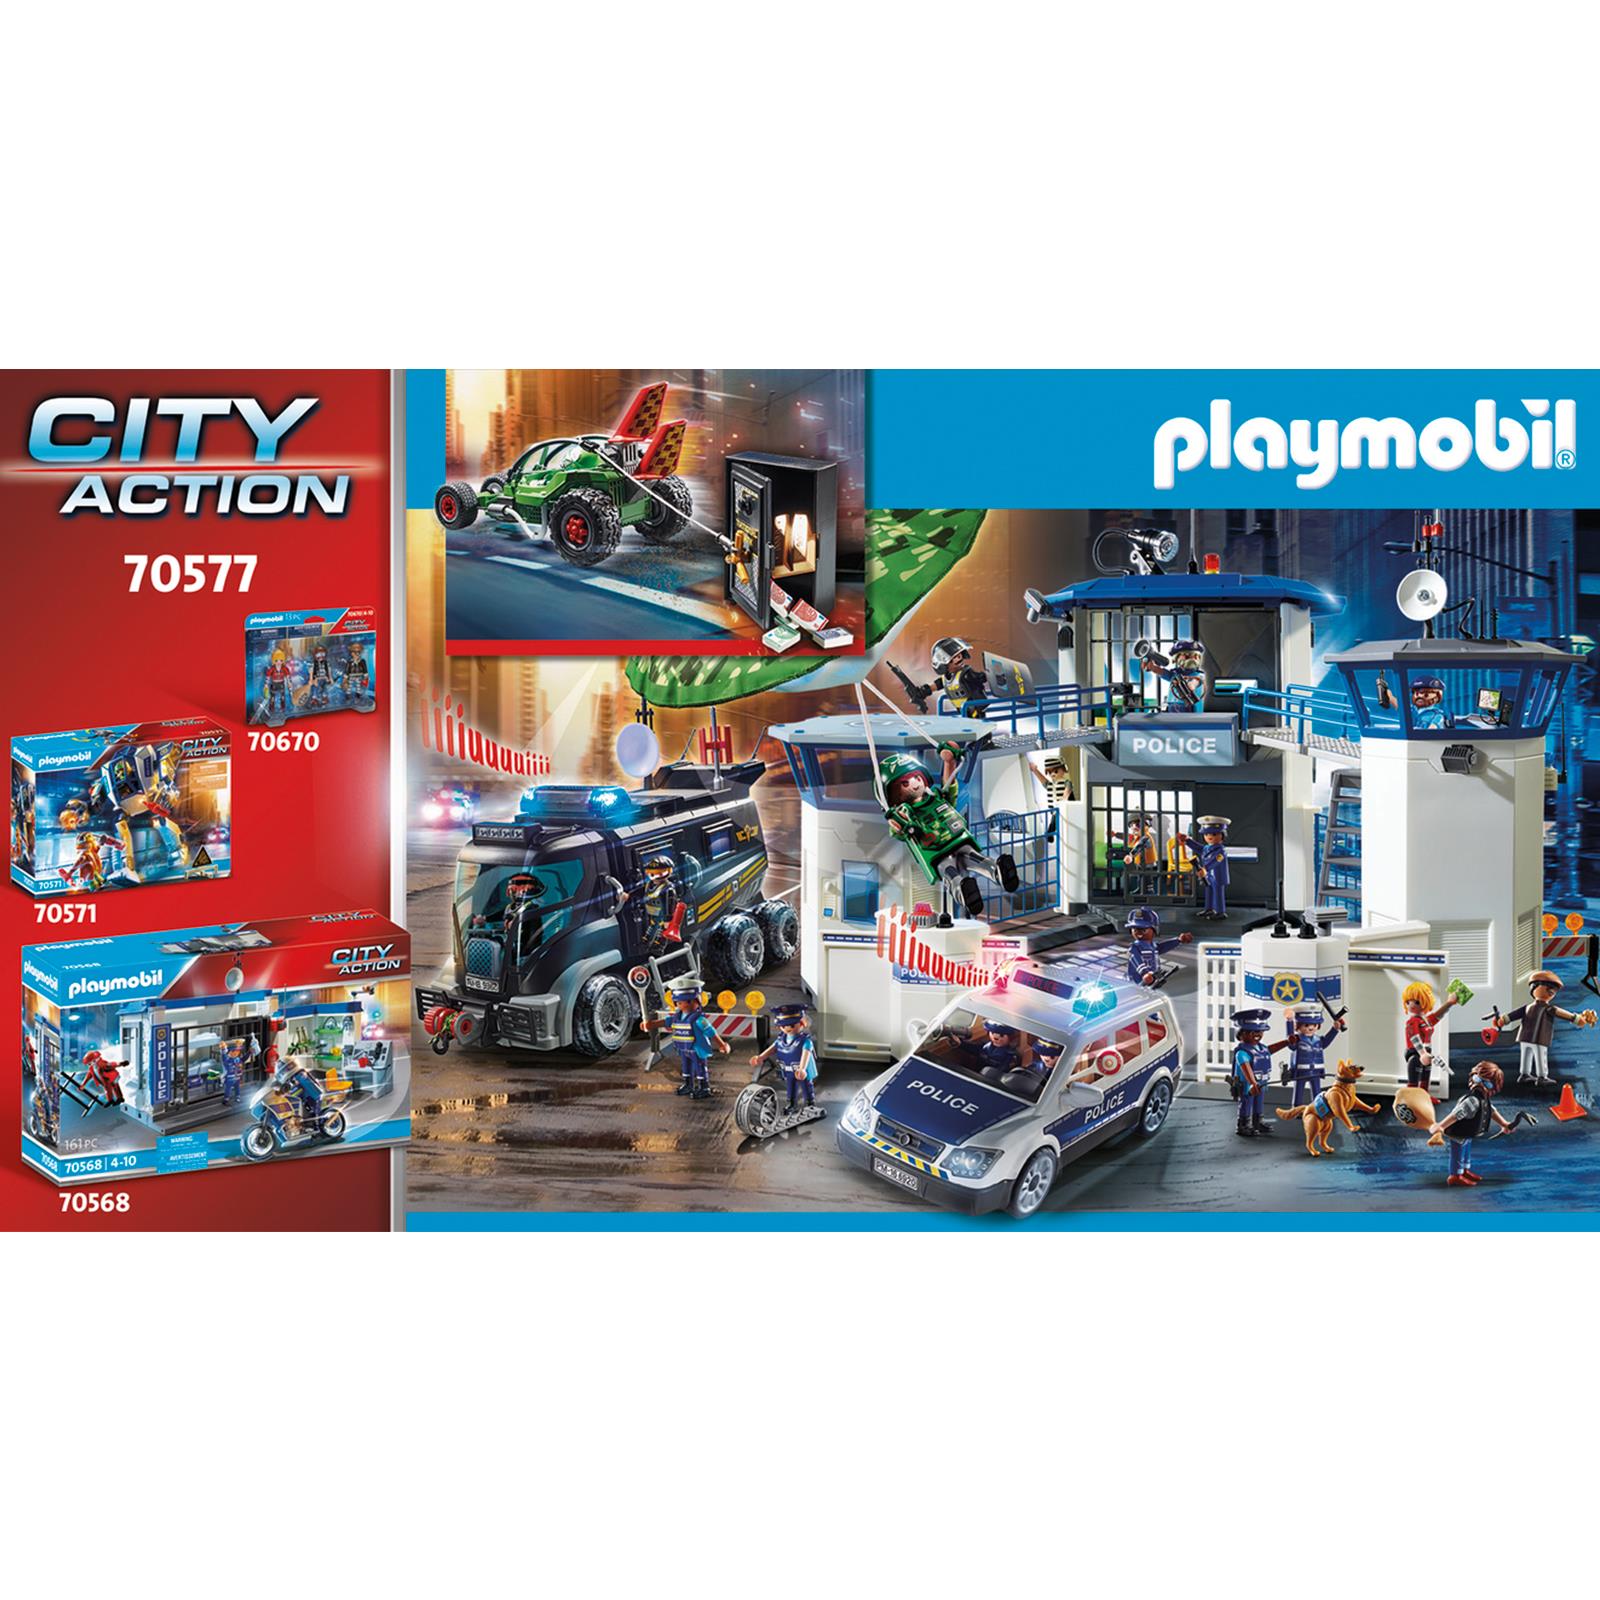 Playmobil City Action Prison Escape - 70568 – The Red Balloon Toy Store